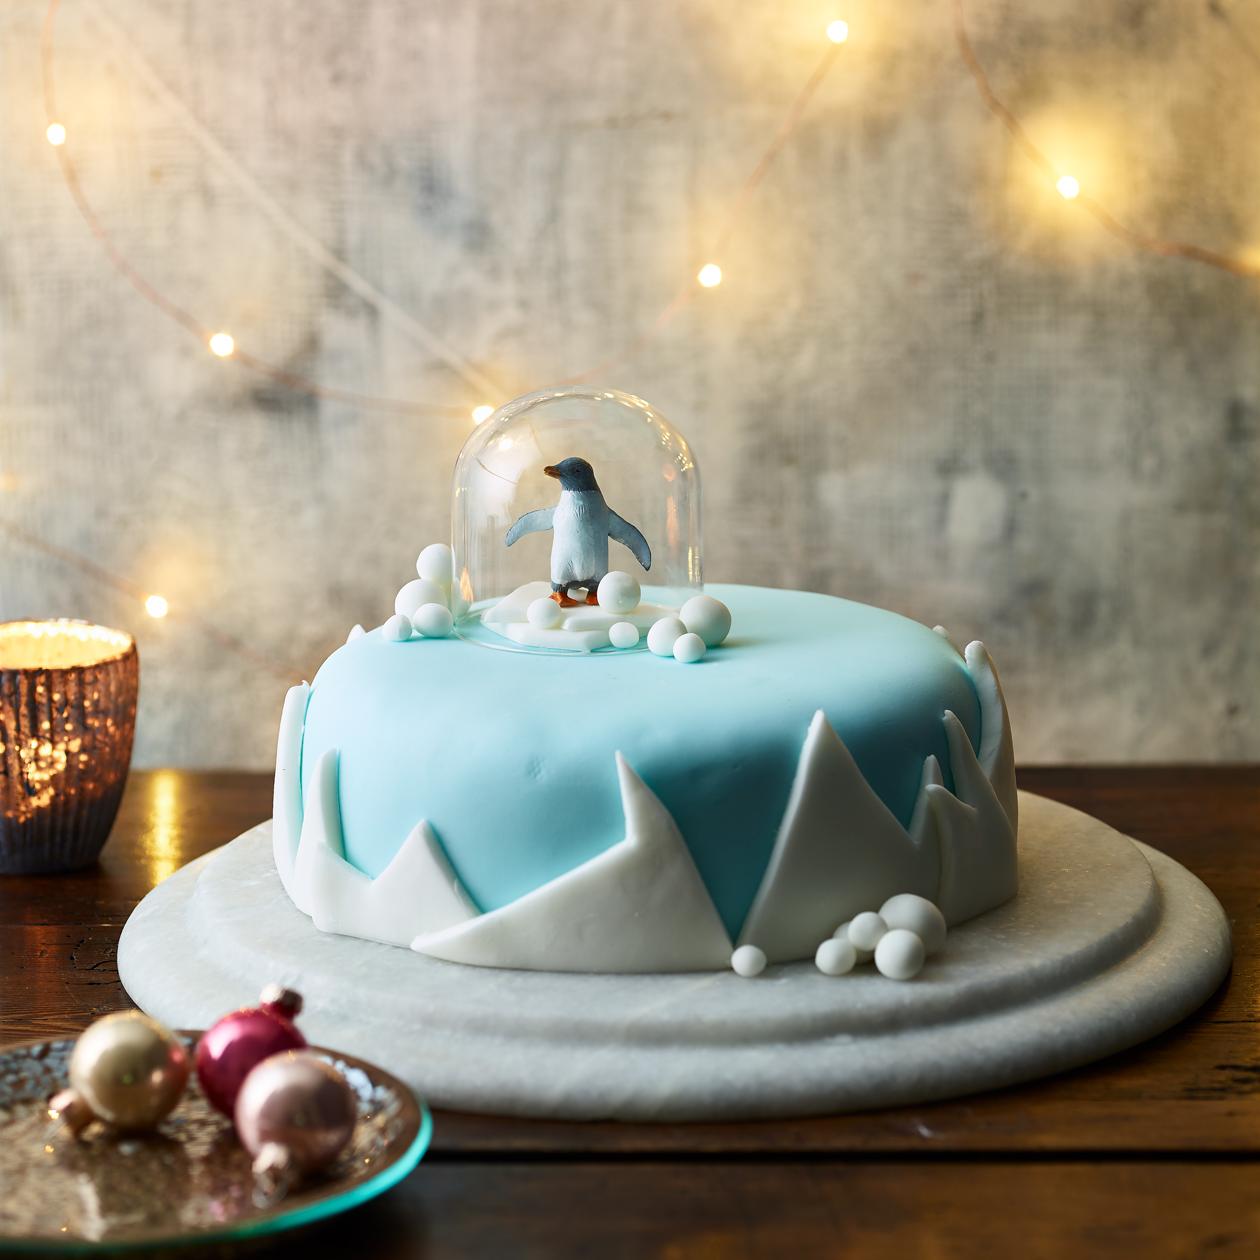 Premium AI Image | A cake in a snow globe with a christmas decoration on  the table.